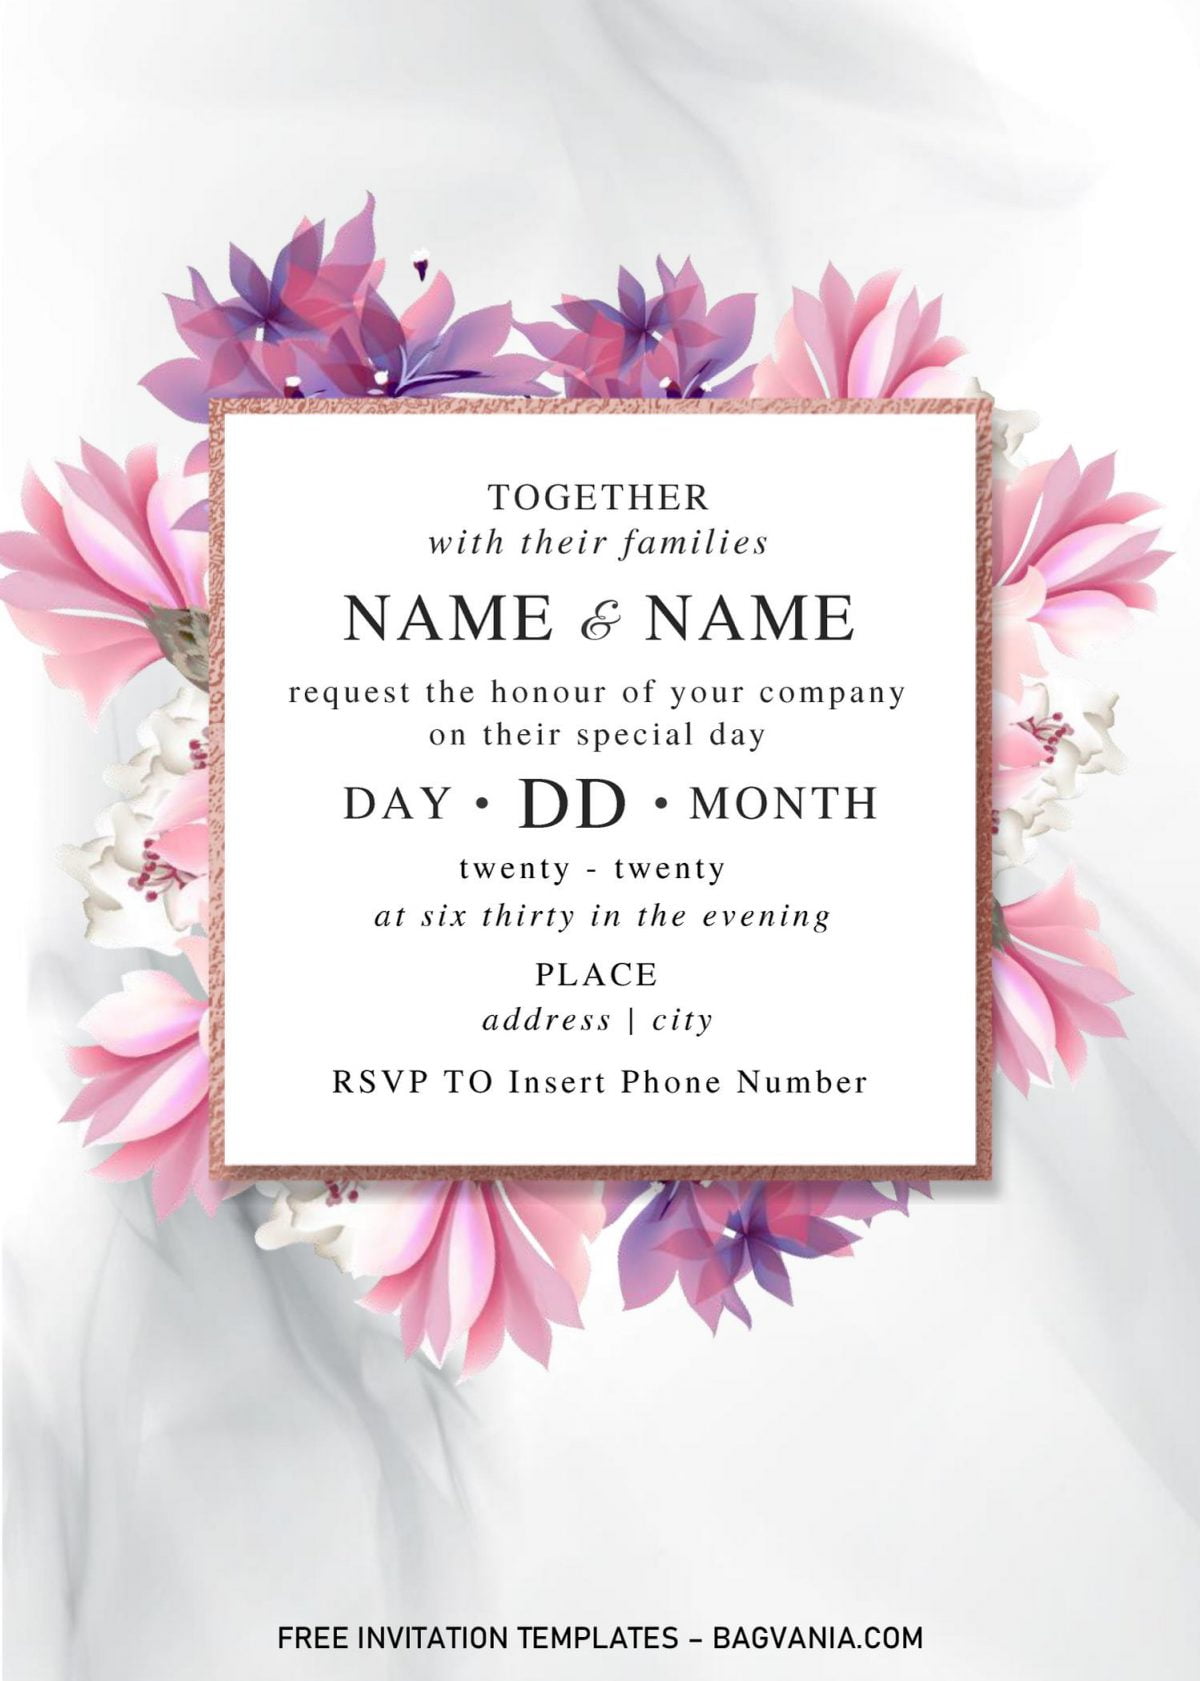 Festive Floral Wedding Invitation Templates - Editable With Microsoft Word and has white and black marble background